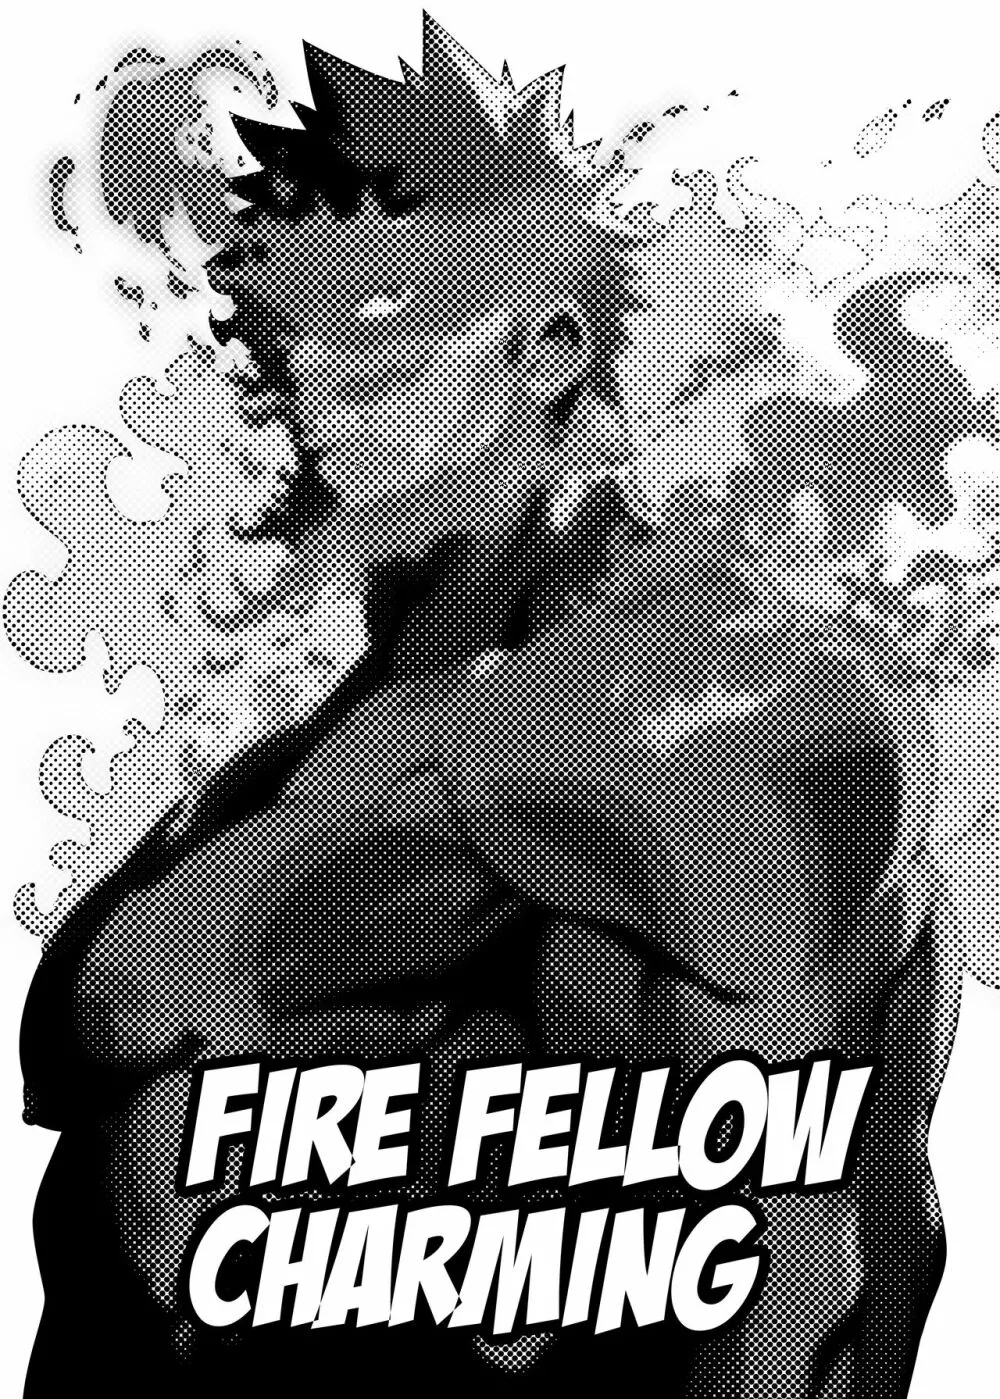 FIRE FELLOW CHARMING - page2